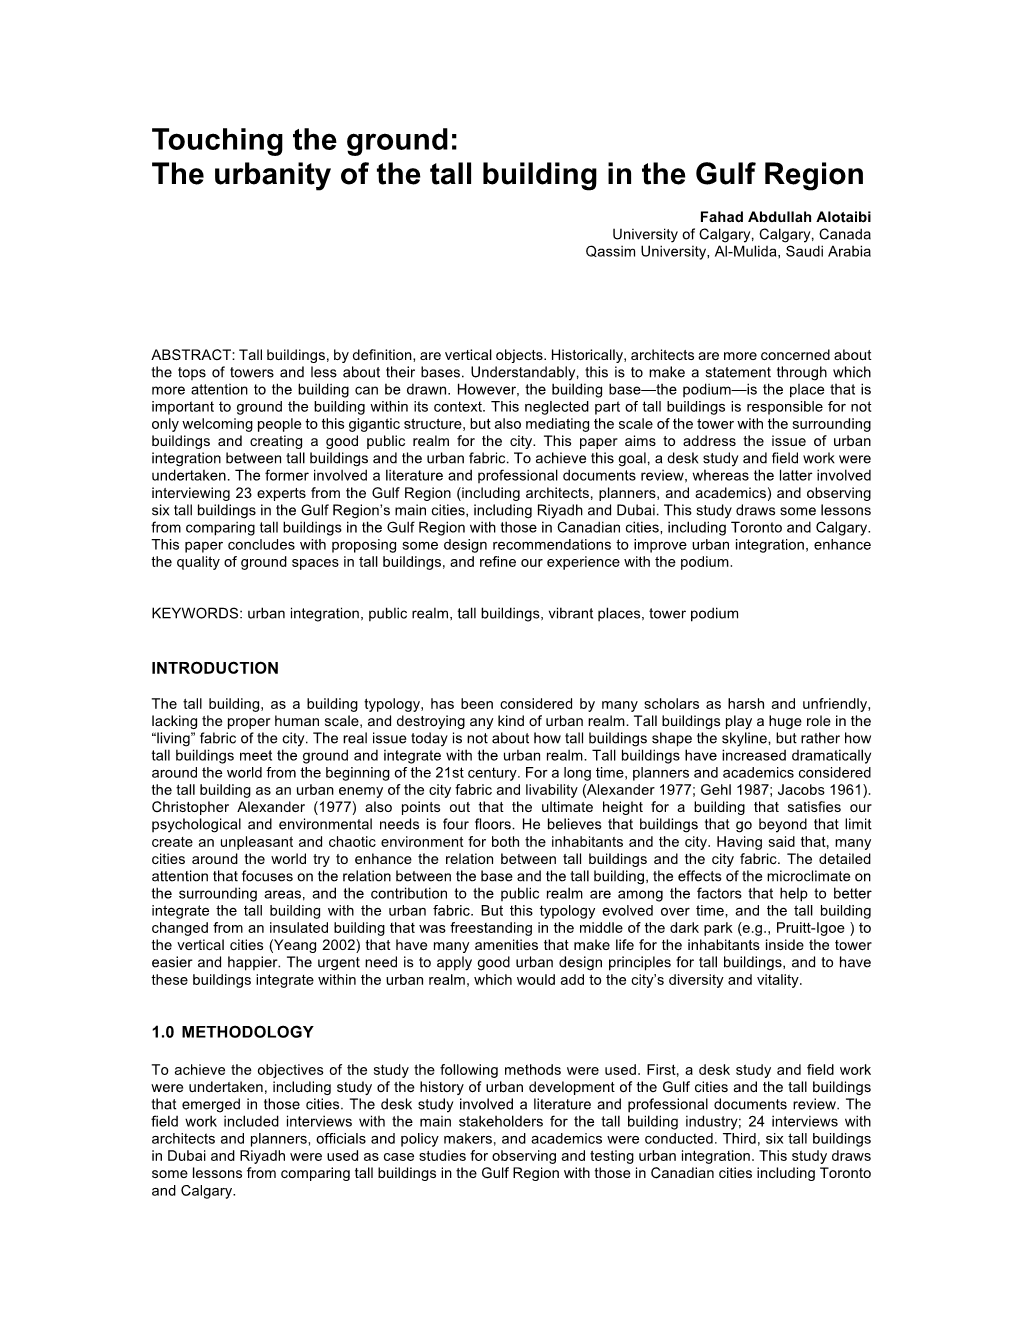 Touching the Ground: the Urbanity of the Tall Building in the Gulf Region